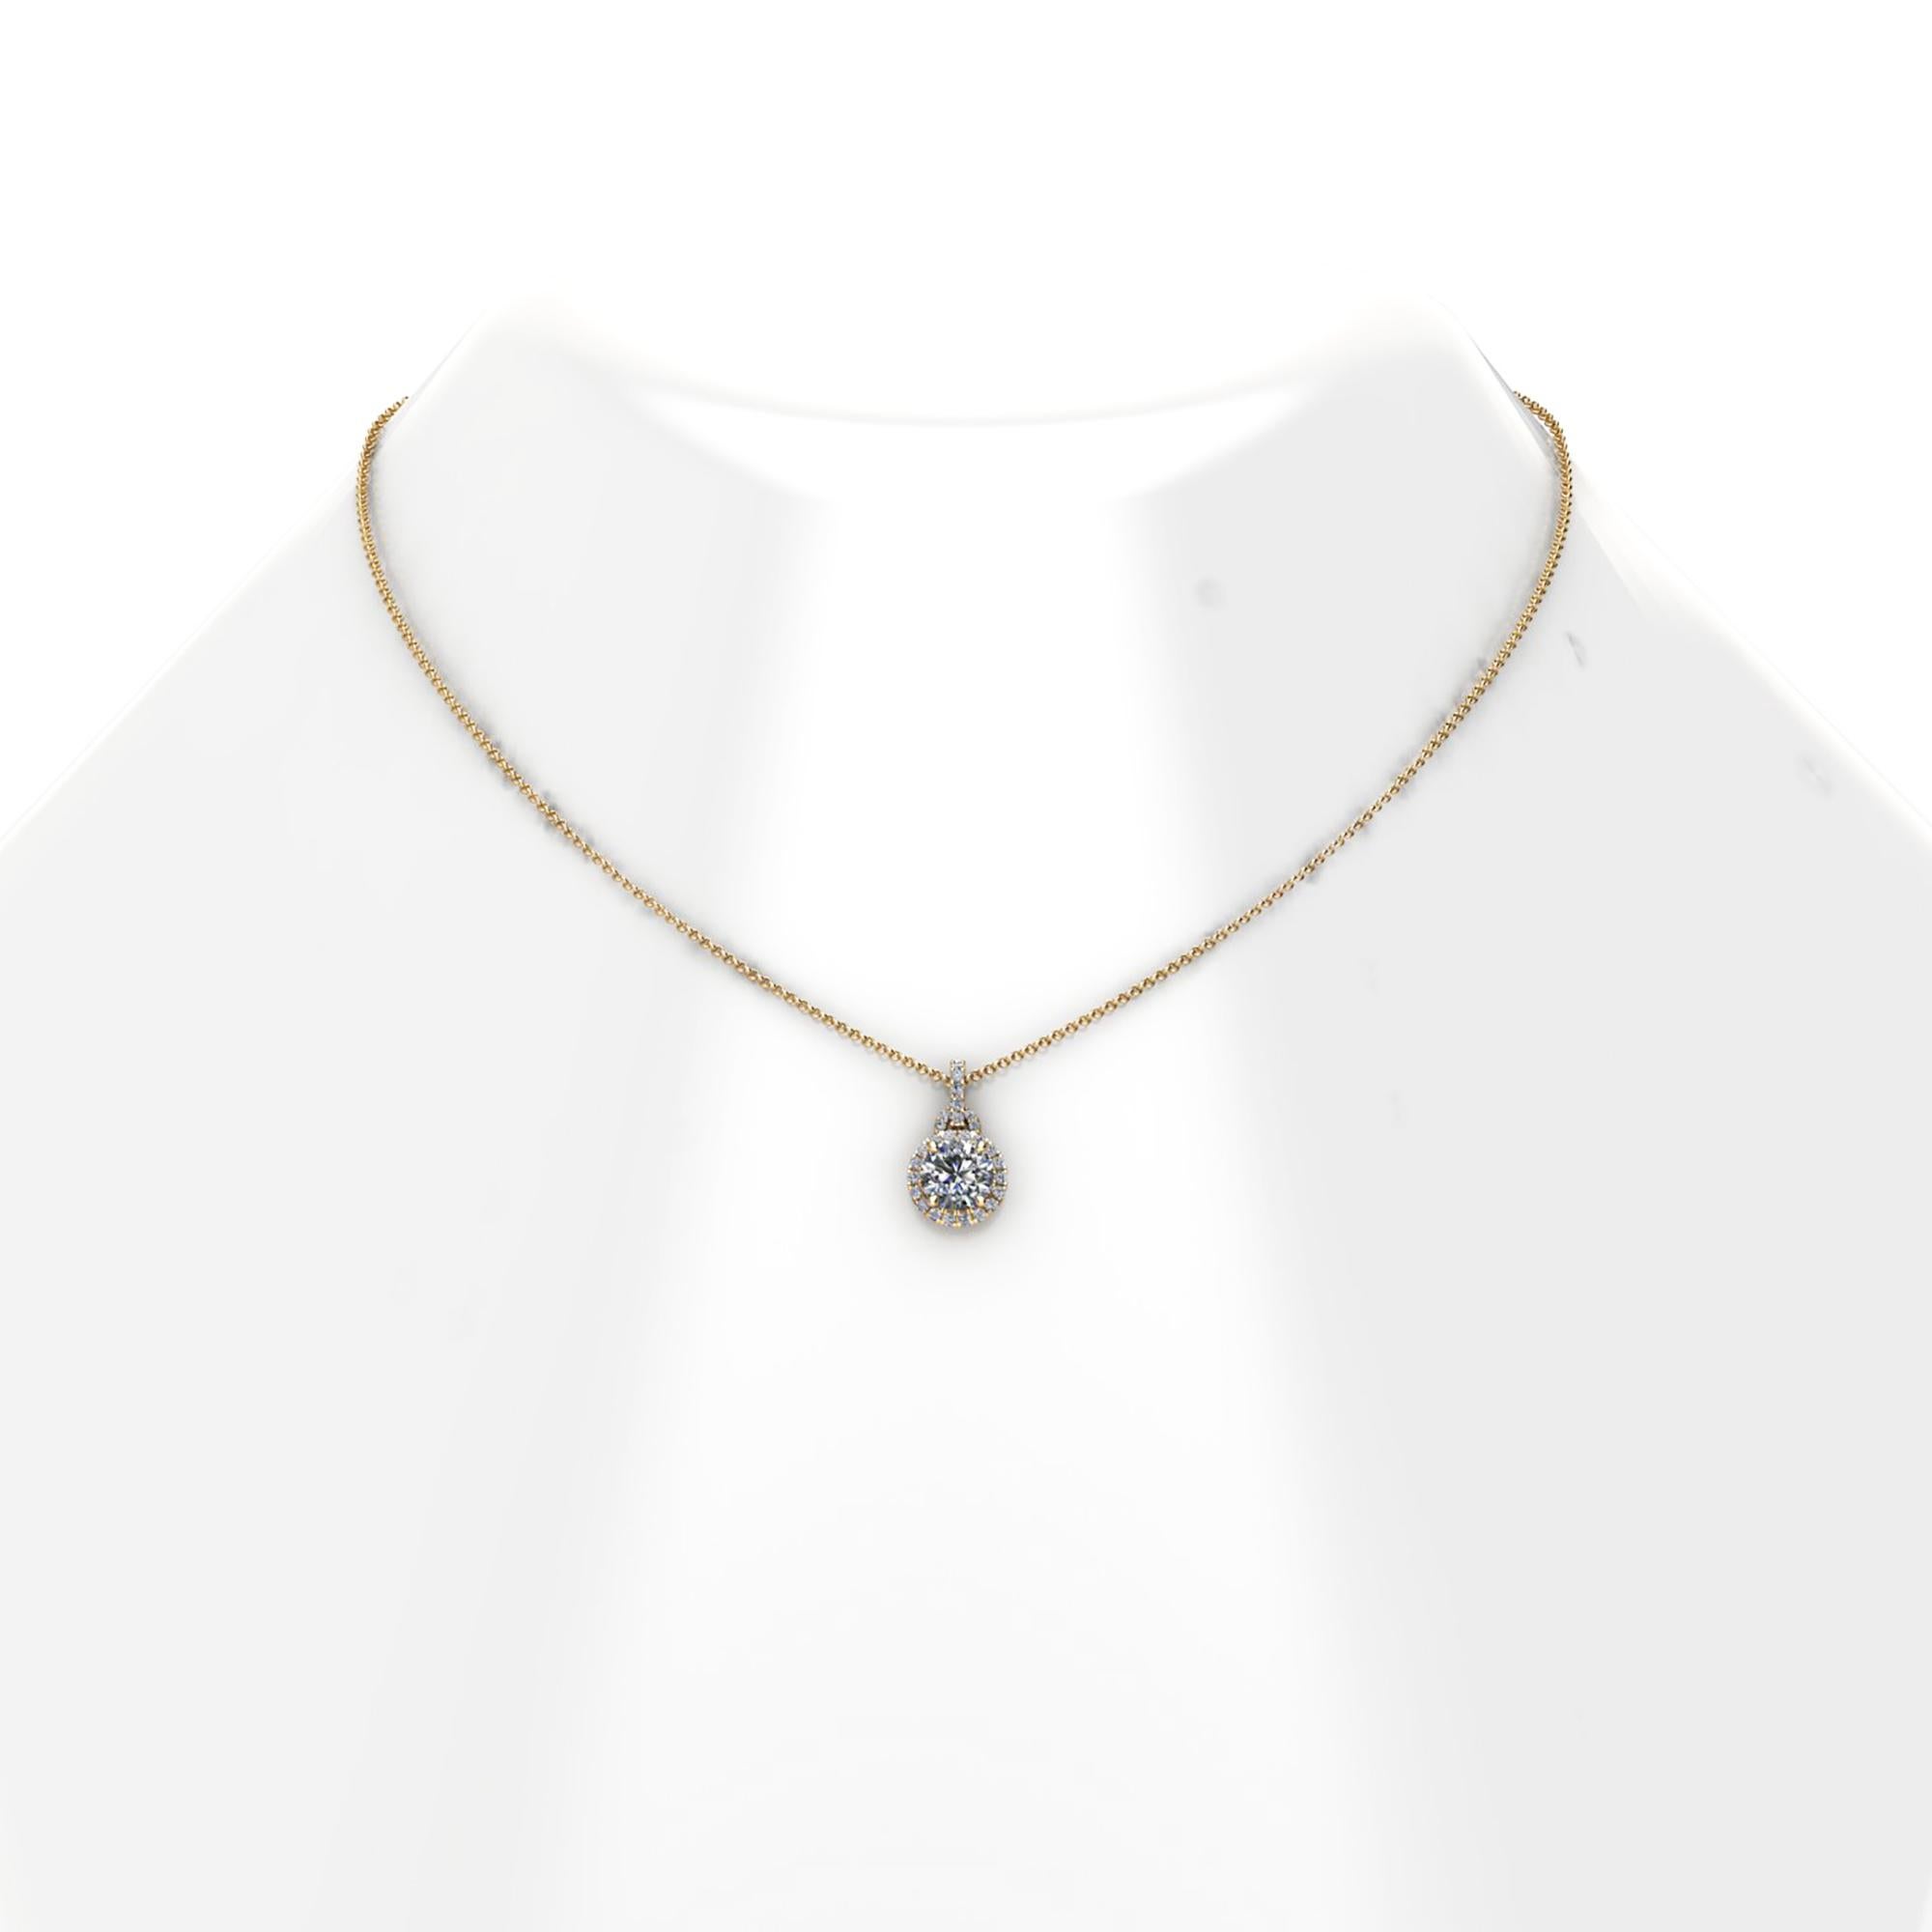 1.01 carat GIA Certified round brilliant cut diamond, H color, VS2 clarity, 18k yellow gold diamond halo necklace, with a total diamond carat weight of 1.20 carat, with 18k yellow gold think cable chain with 16